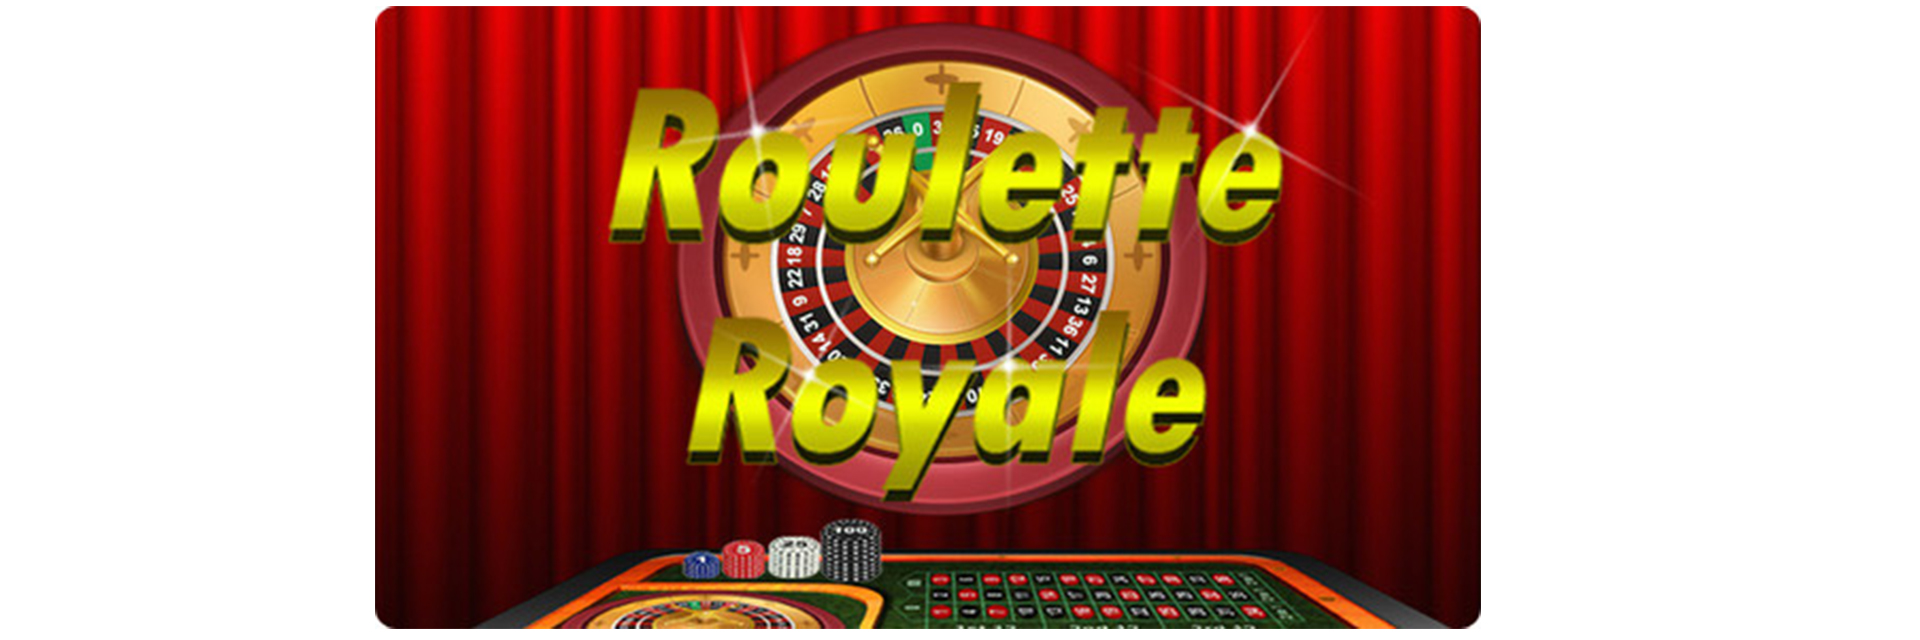 Roulette Royale casino game.